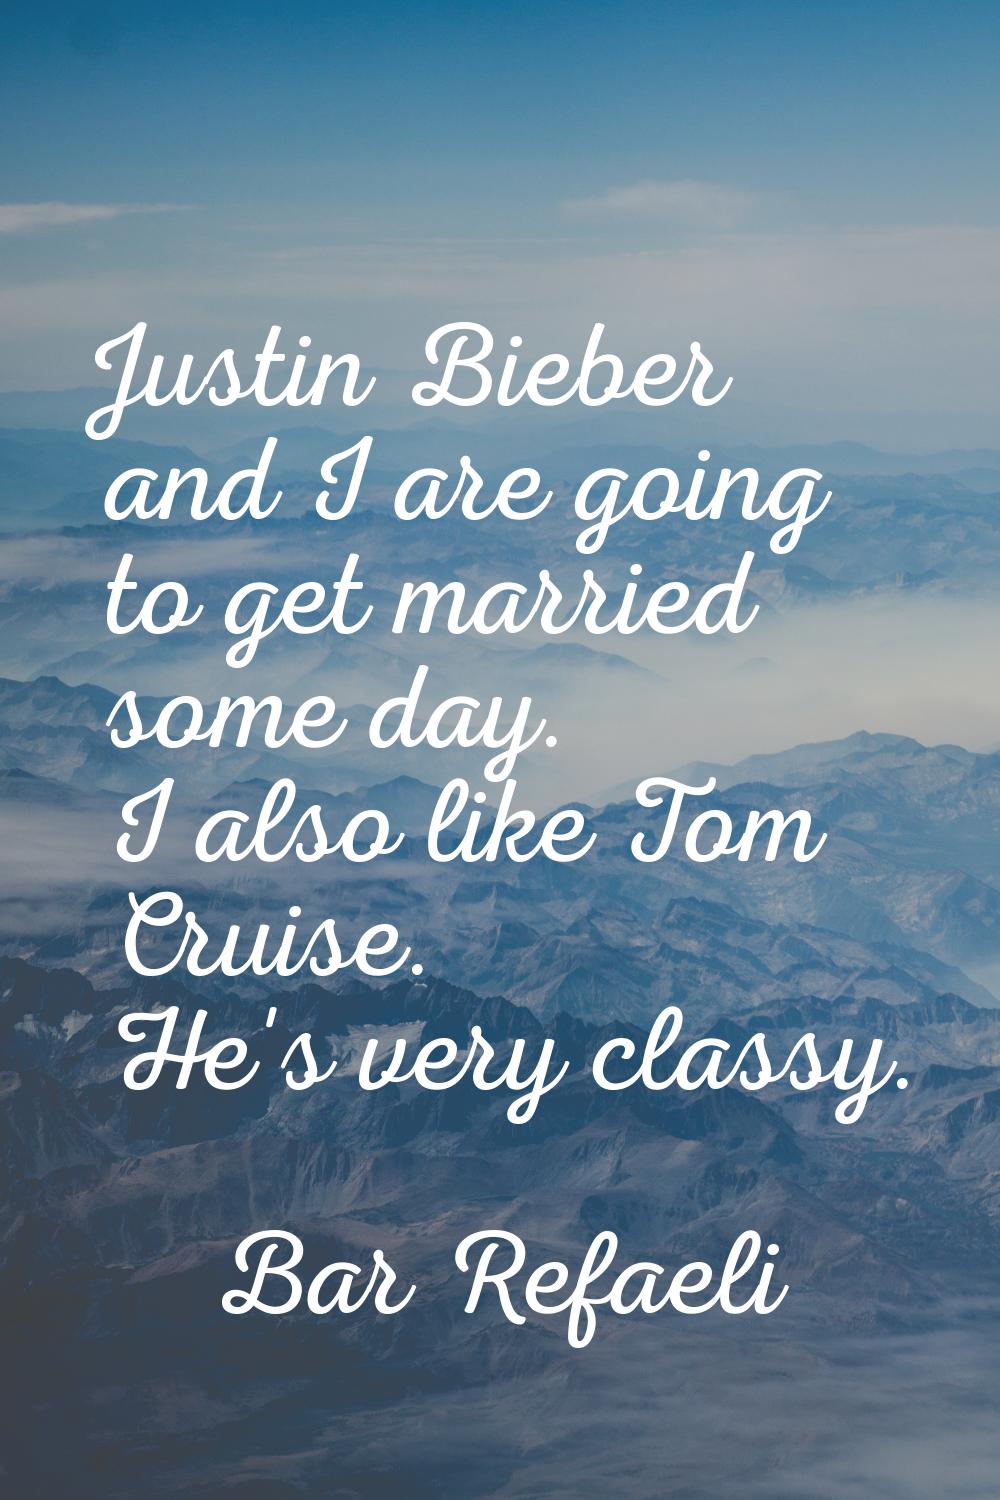 Justin Bieber and I are going to get married some day. I also like Tom Cruise. He's very classy.